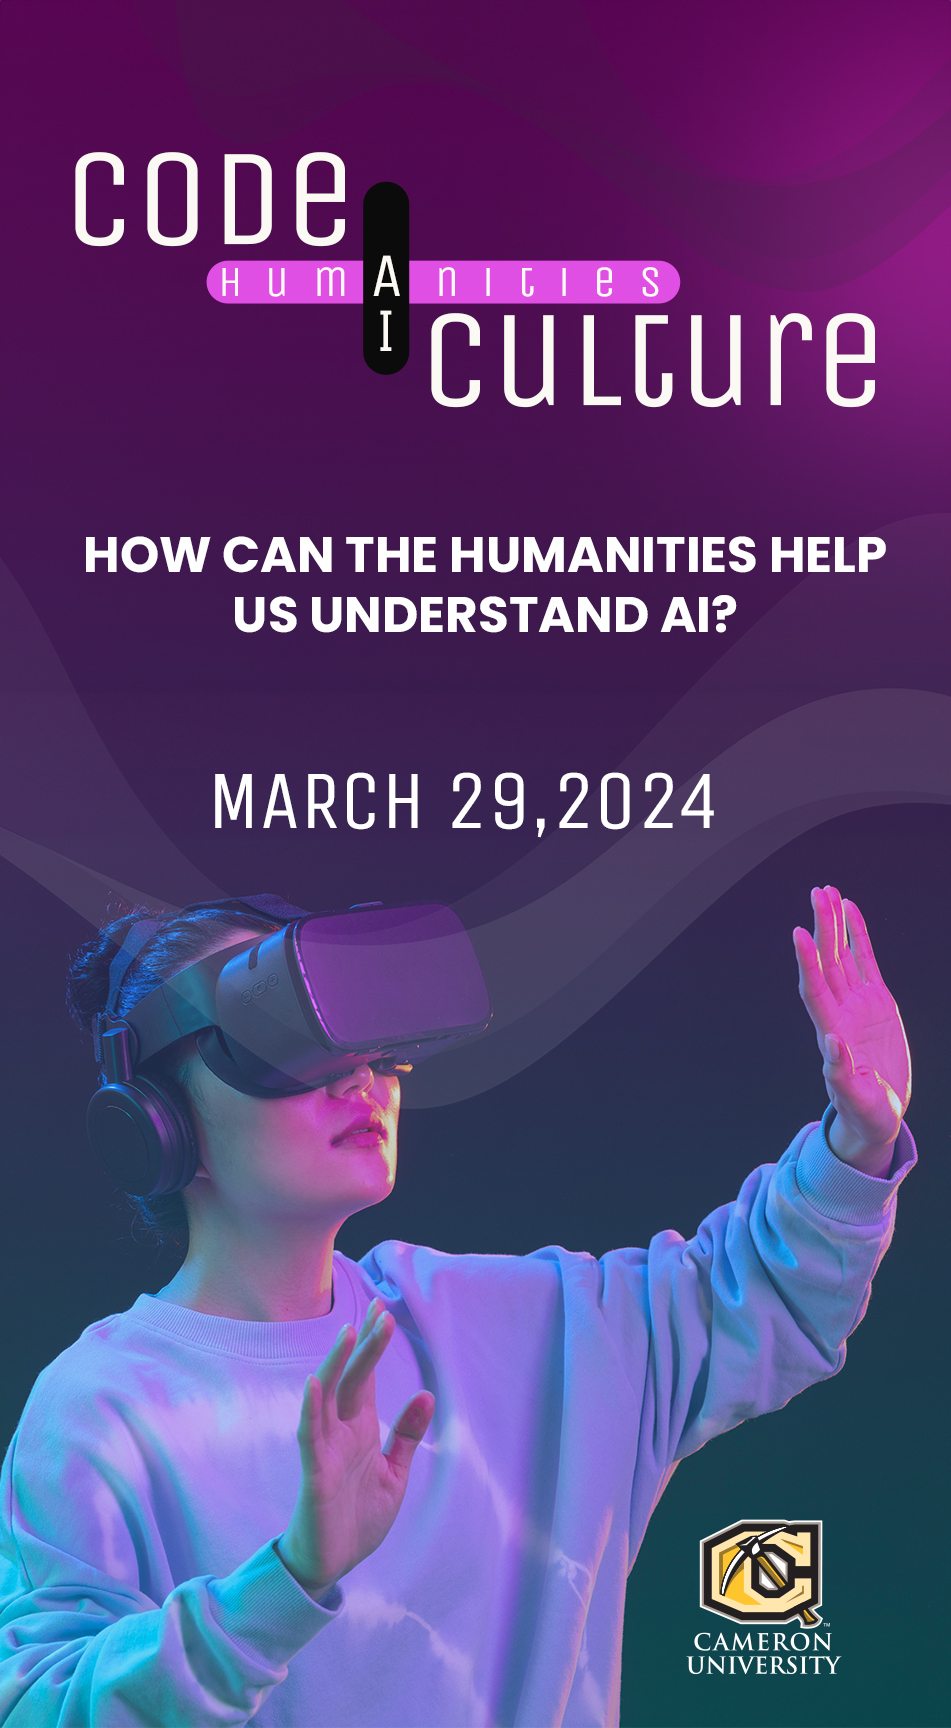 CODE + Culture
AI Humanities
How can the humanities help us understand AI?
March 29, 2024